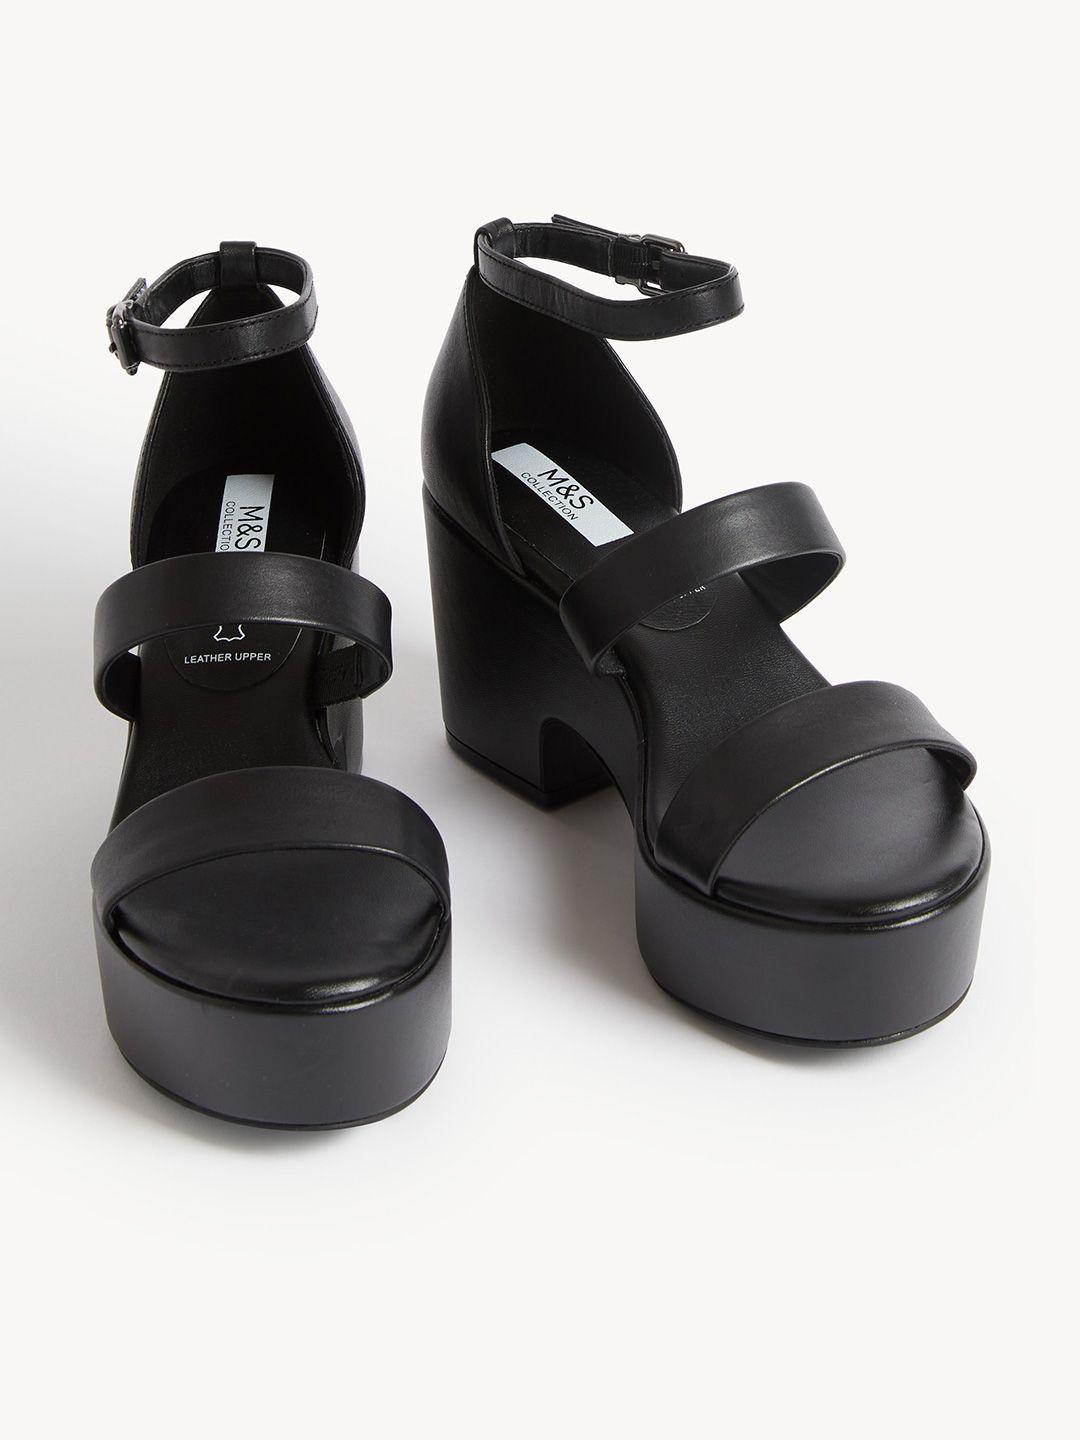 marks & spencer open toe leather block heels with buckles